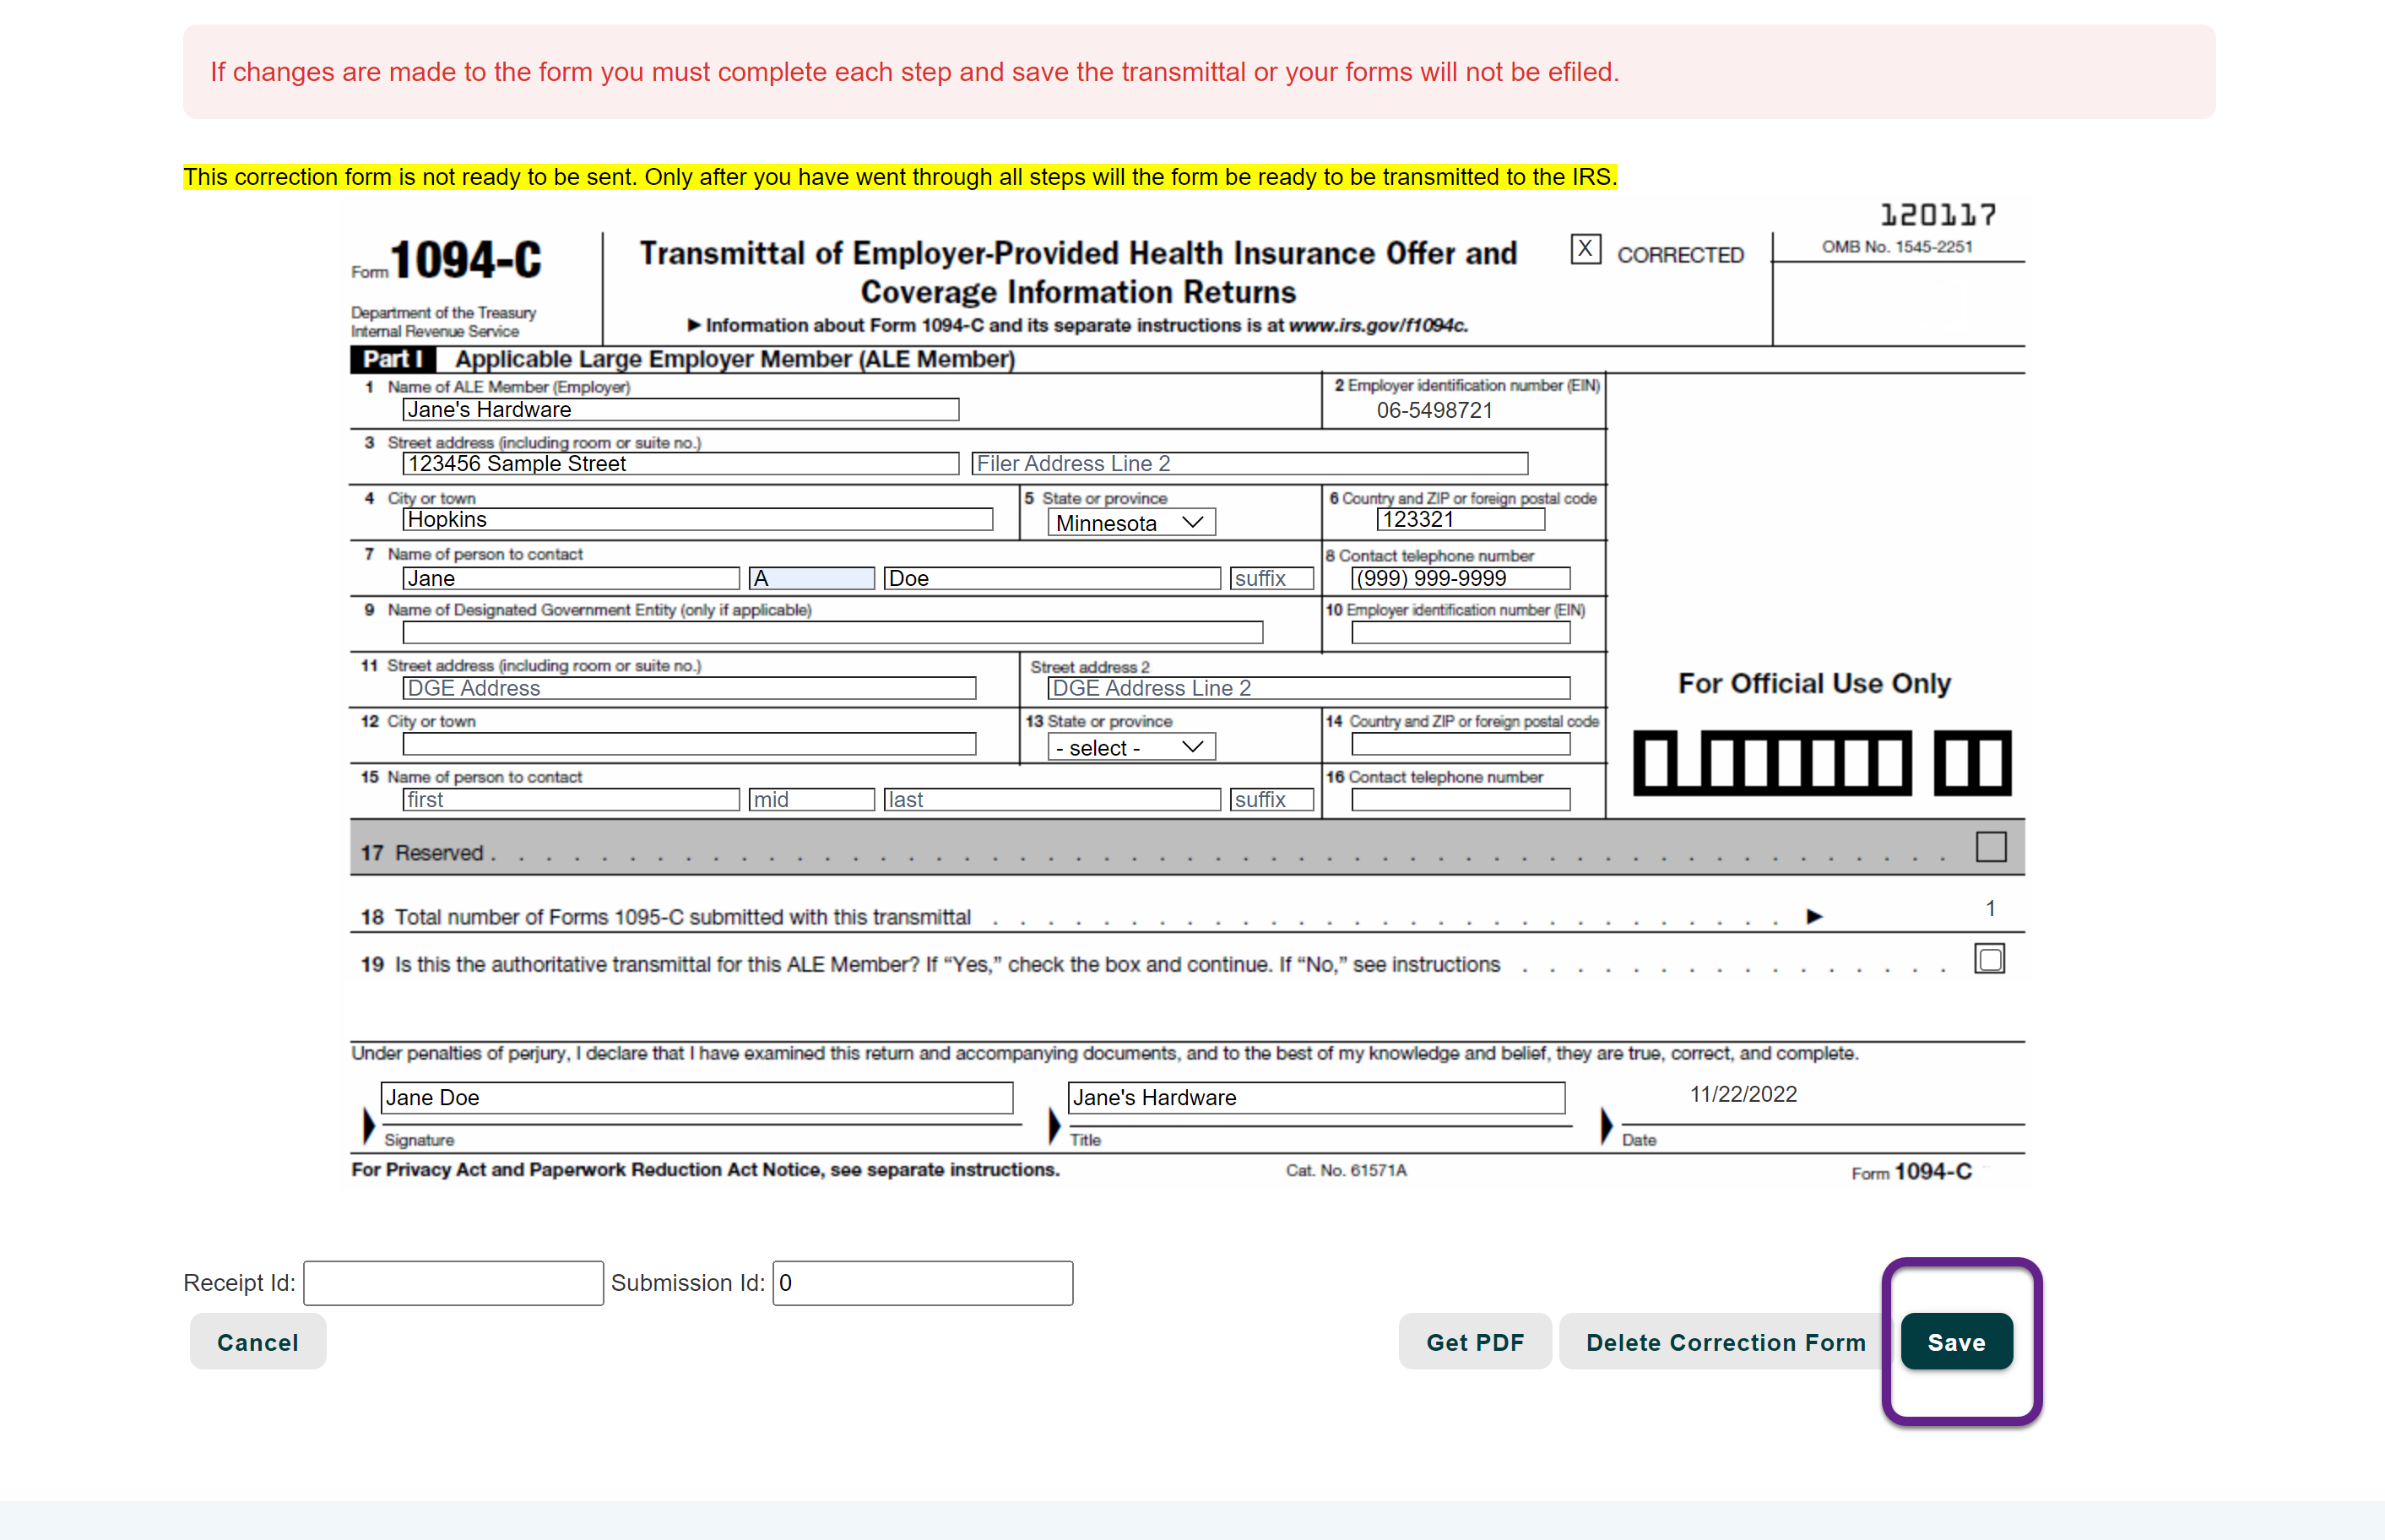 Image of a 1094-C form with a callout on the Save button.